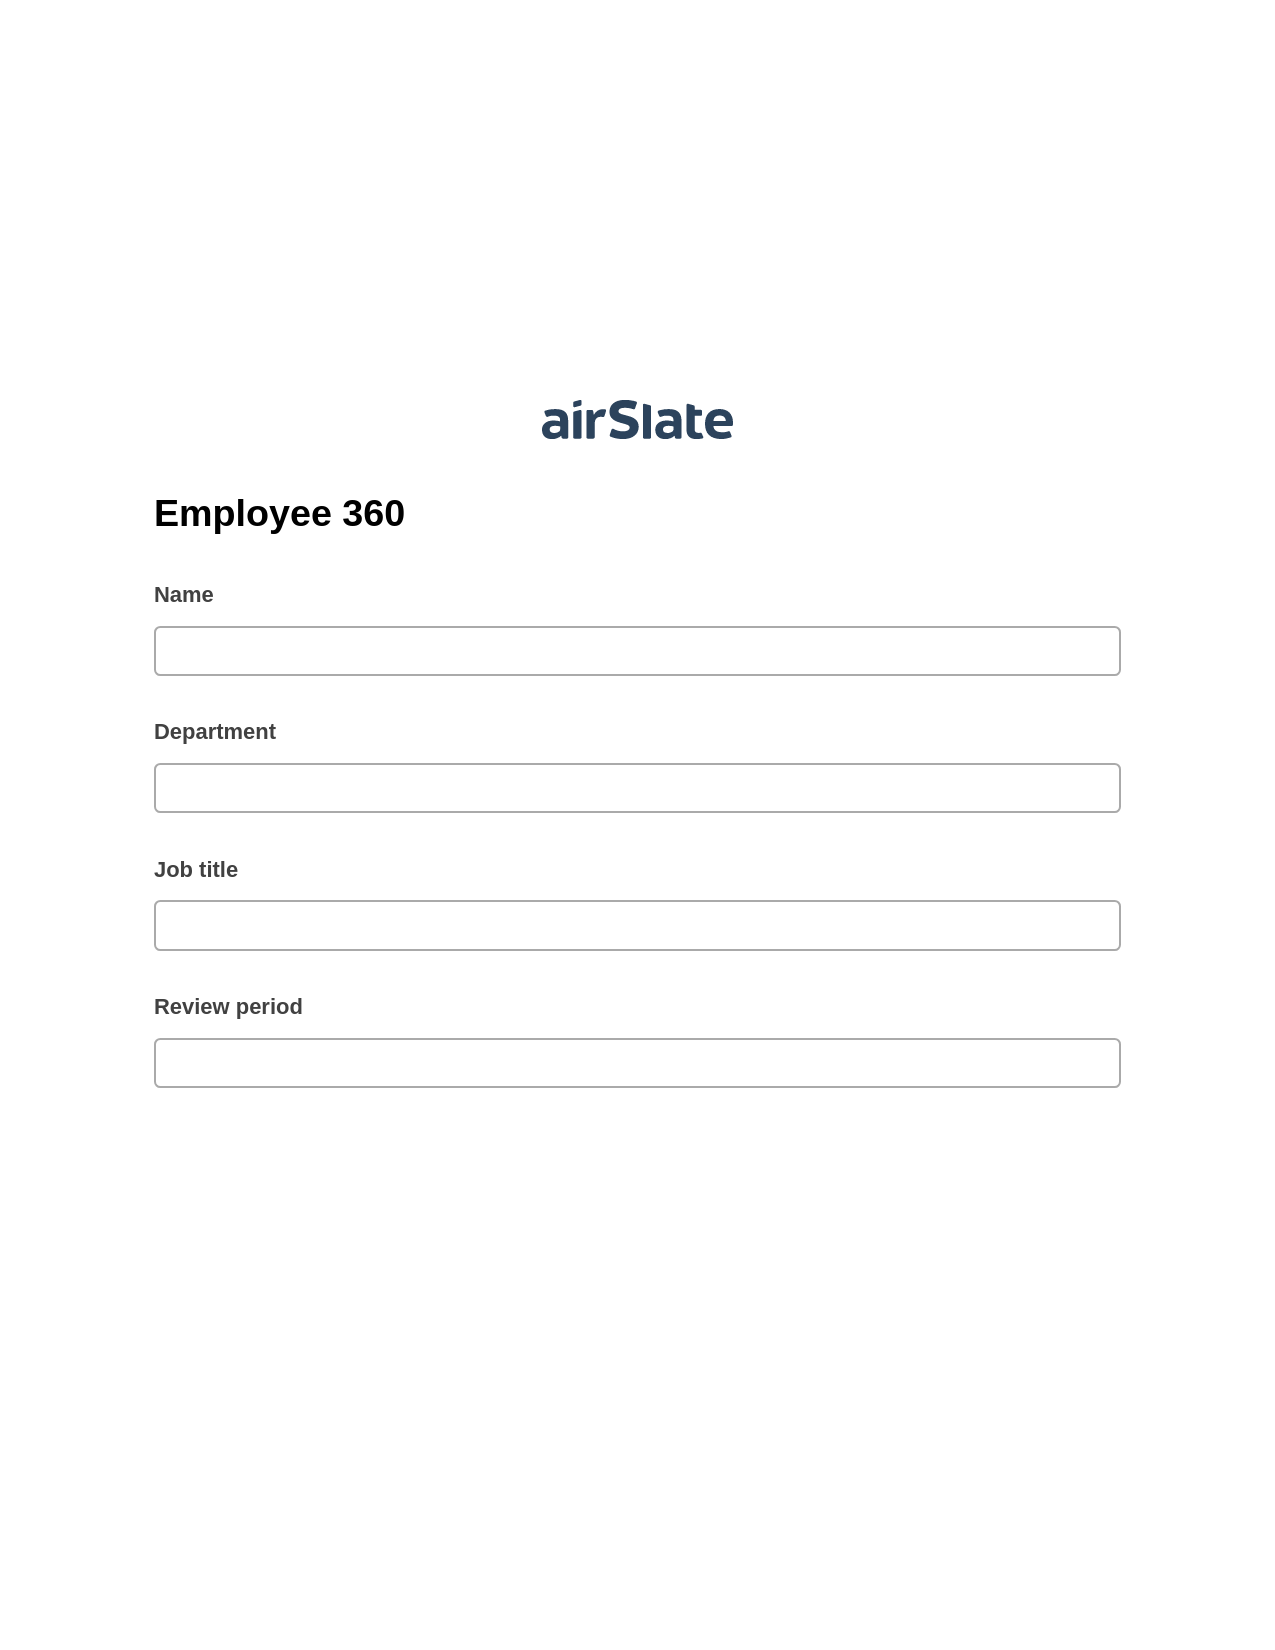 Multirole Employee 360 Pre-fill Dropdowns from Airtable, Invoke Salesforce Process Bot, Archive to SharePoint Folder Bot